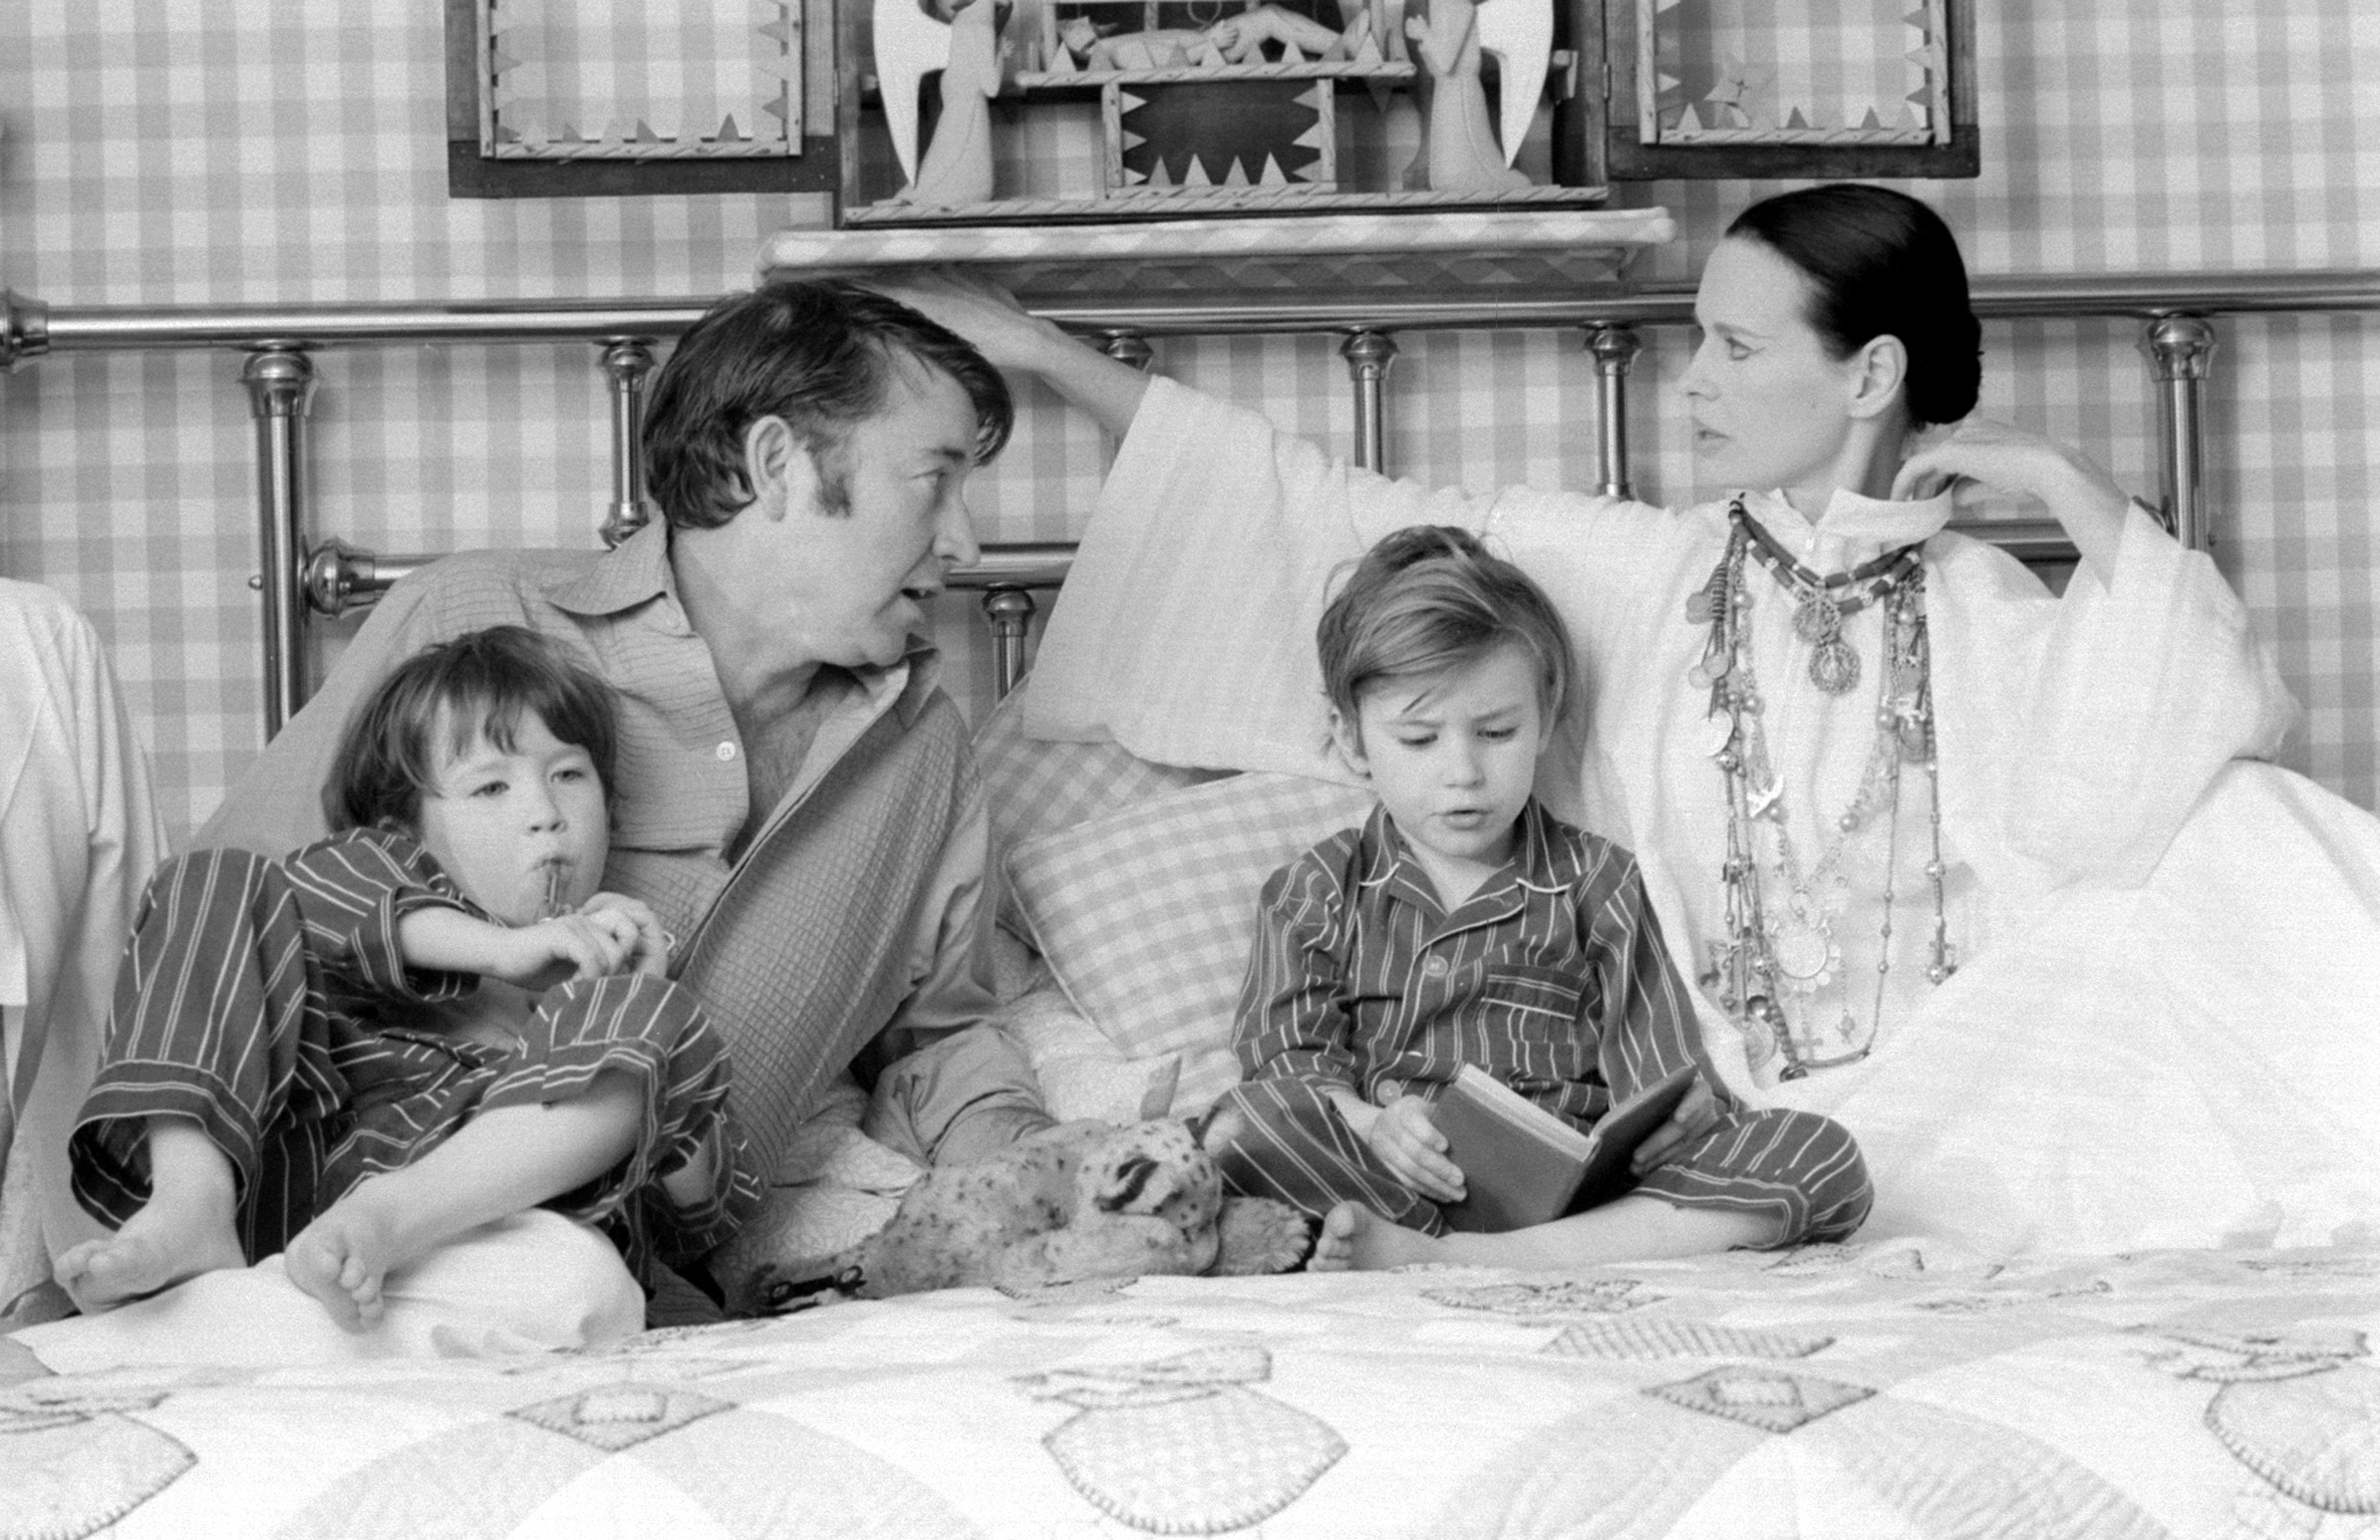 Actor and author Wyatt Emory Cooper, Carter Vanderbilt Cooper, Anderson Cooper, American heiress and socialite Gloria Vanderbilt pose for a family portrait as they play on a bed in their home on March 30, 1972 in Southampton, Long Island, New York. | Source: Getty Images